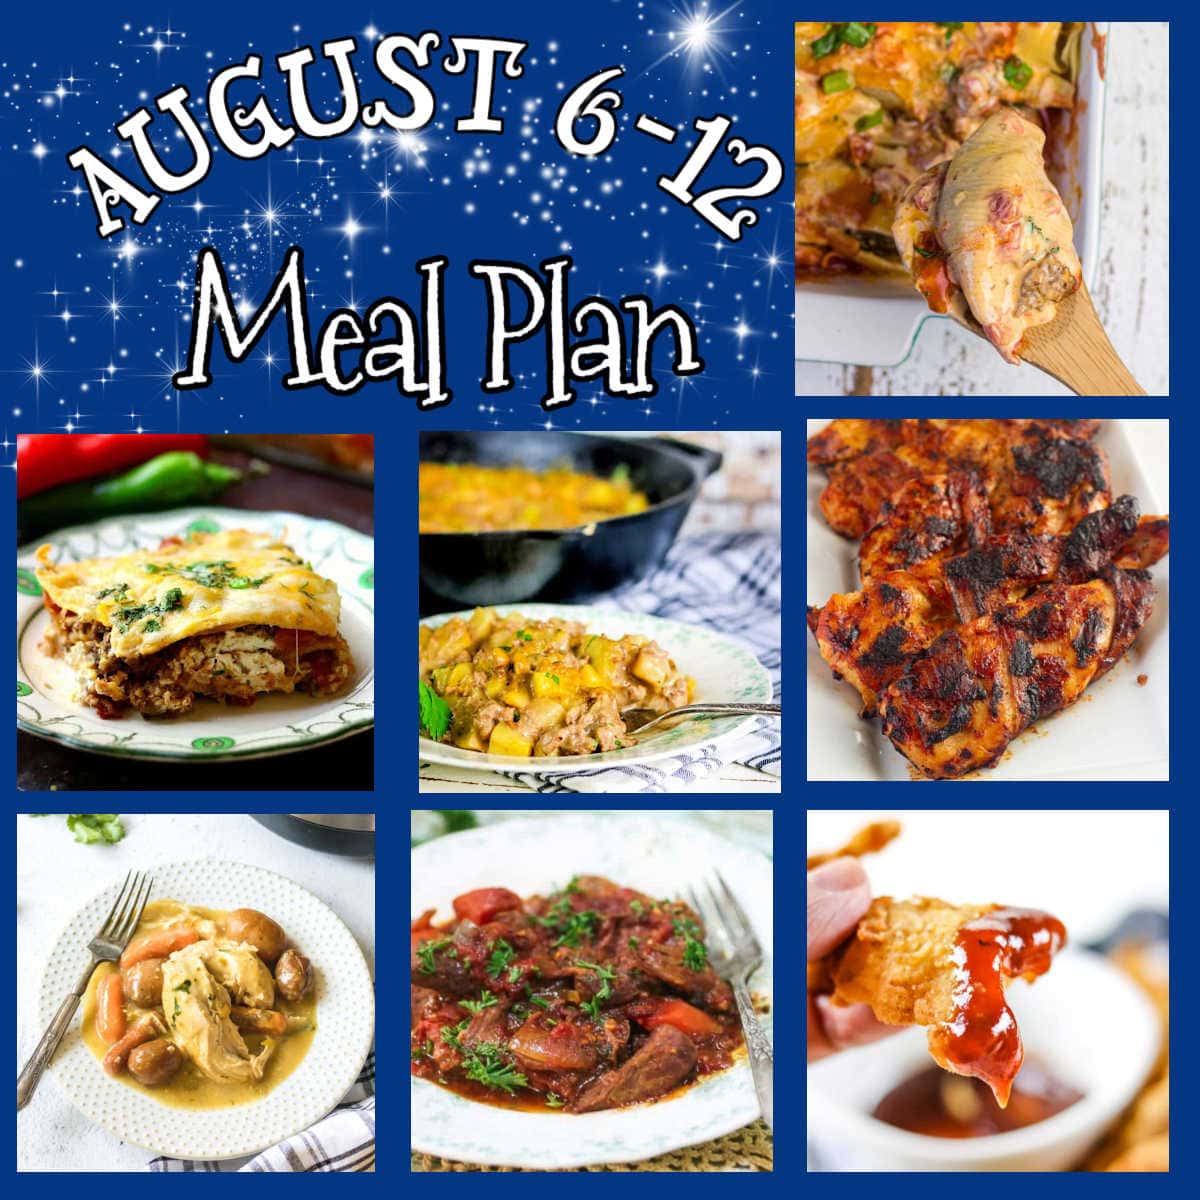 Collage of main dish images for this meal plan.